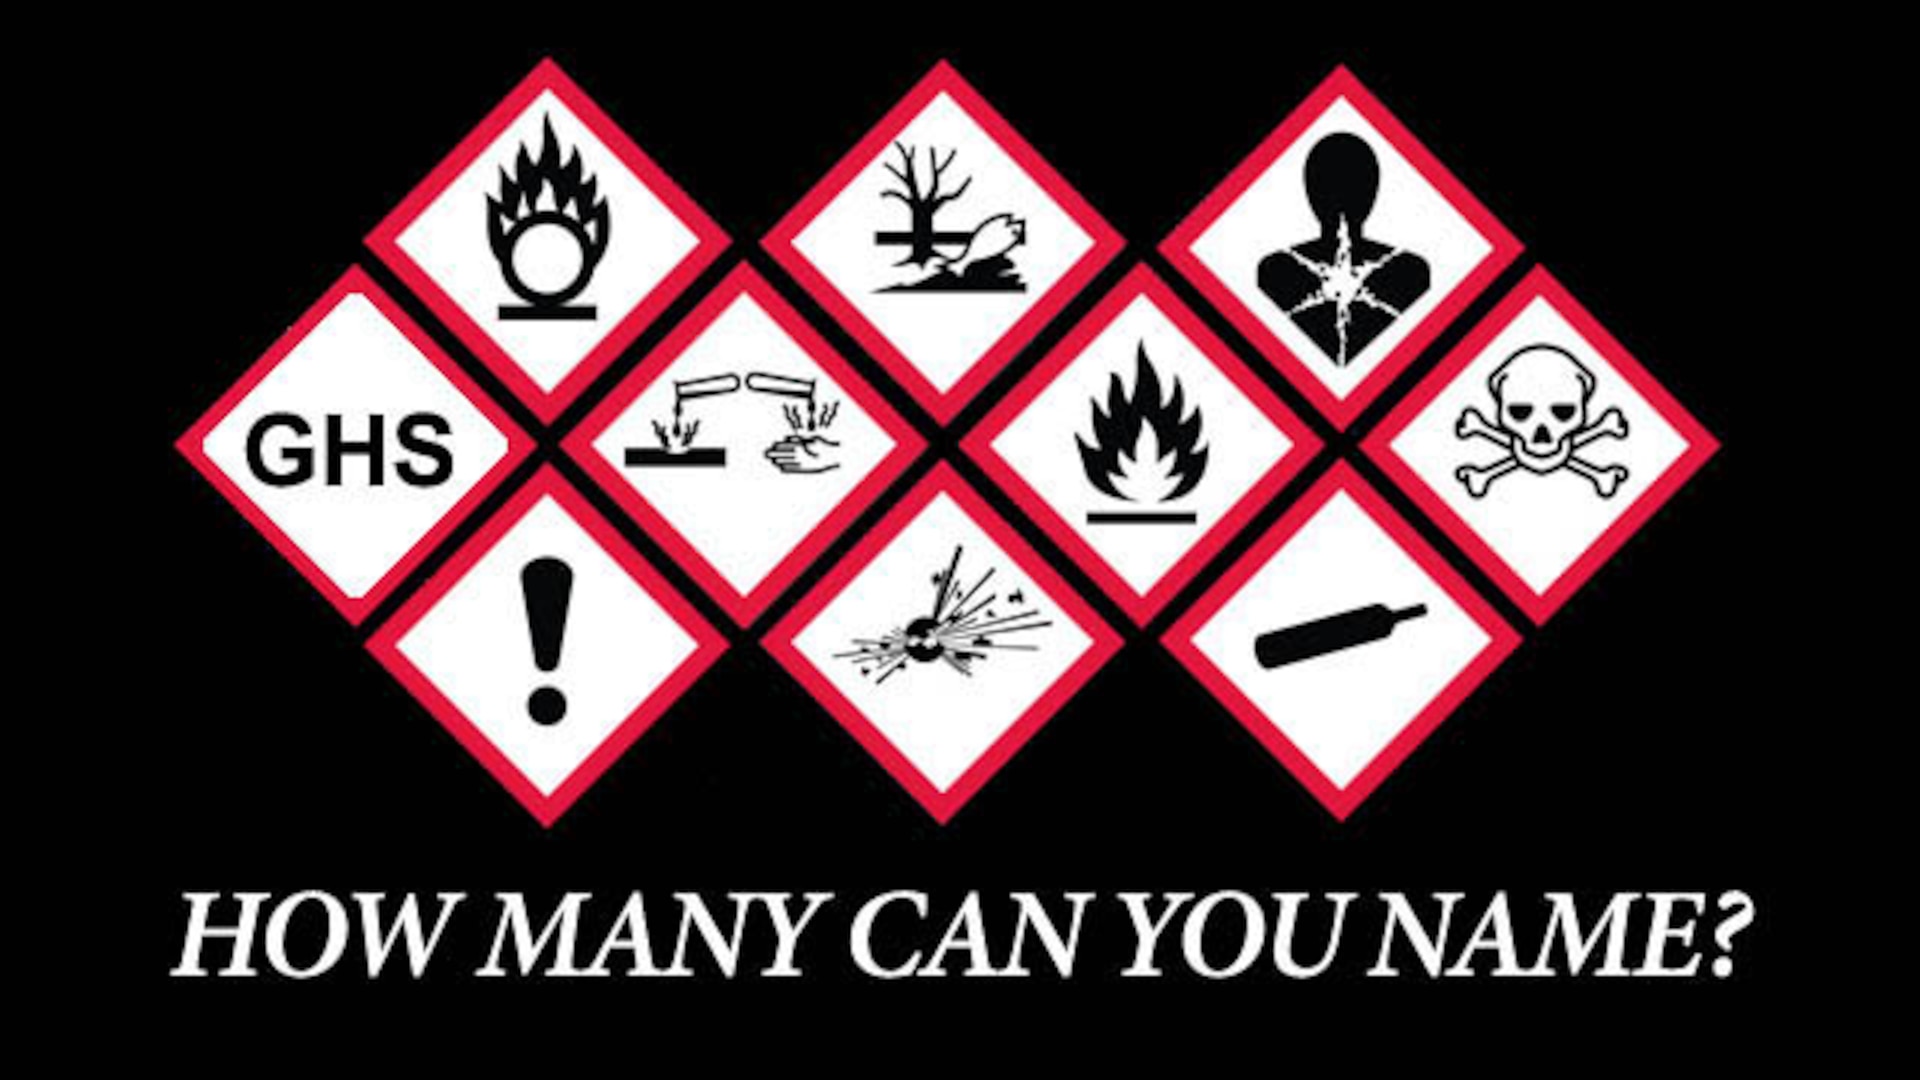 In this month’s safety gram, Defense Contract Management Agency’s Safety and Occupational Health Division reminds agency team members of the Risk Management Program Rules concerning chemical safety. Chemicals often play an important role at both work and home, but they can be dangerous if proper safety standards are not maintained. According to the Occupational Safety and Health Administration, the Globally Harmonized System for Hazard Communication, or GHS, was developed by the United Nations “in order to bring about uniform standards in chemical regulations.” (DCMA graphic by Thomas Perry)